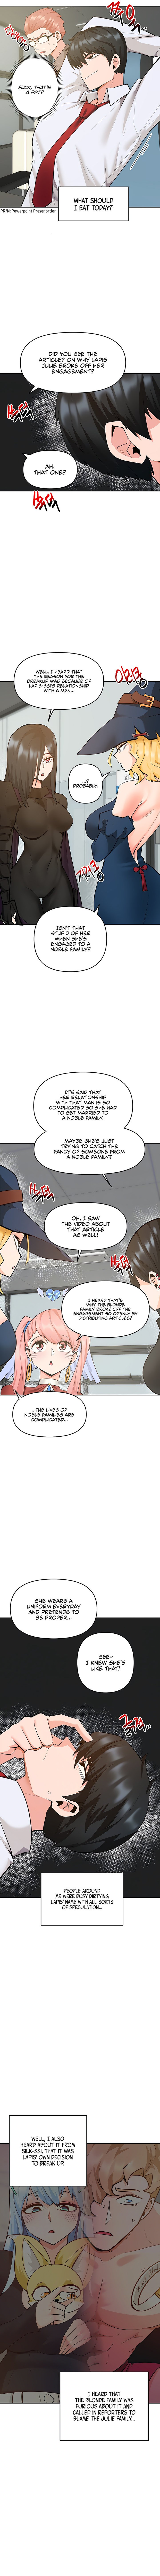 the-hypnosis-app-was-fake-chap-48-1